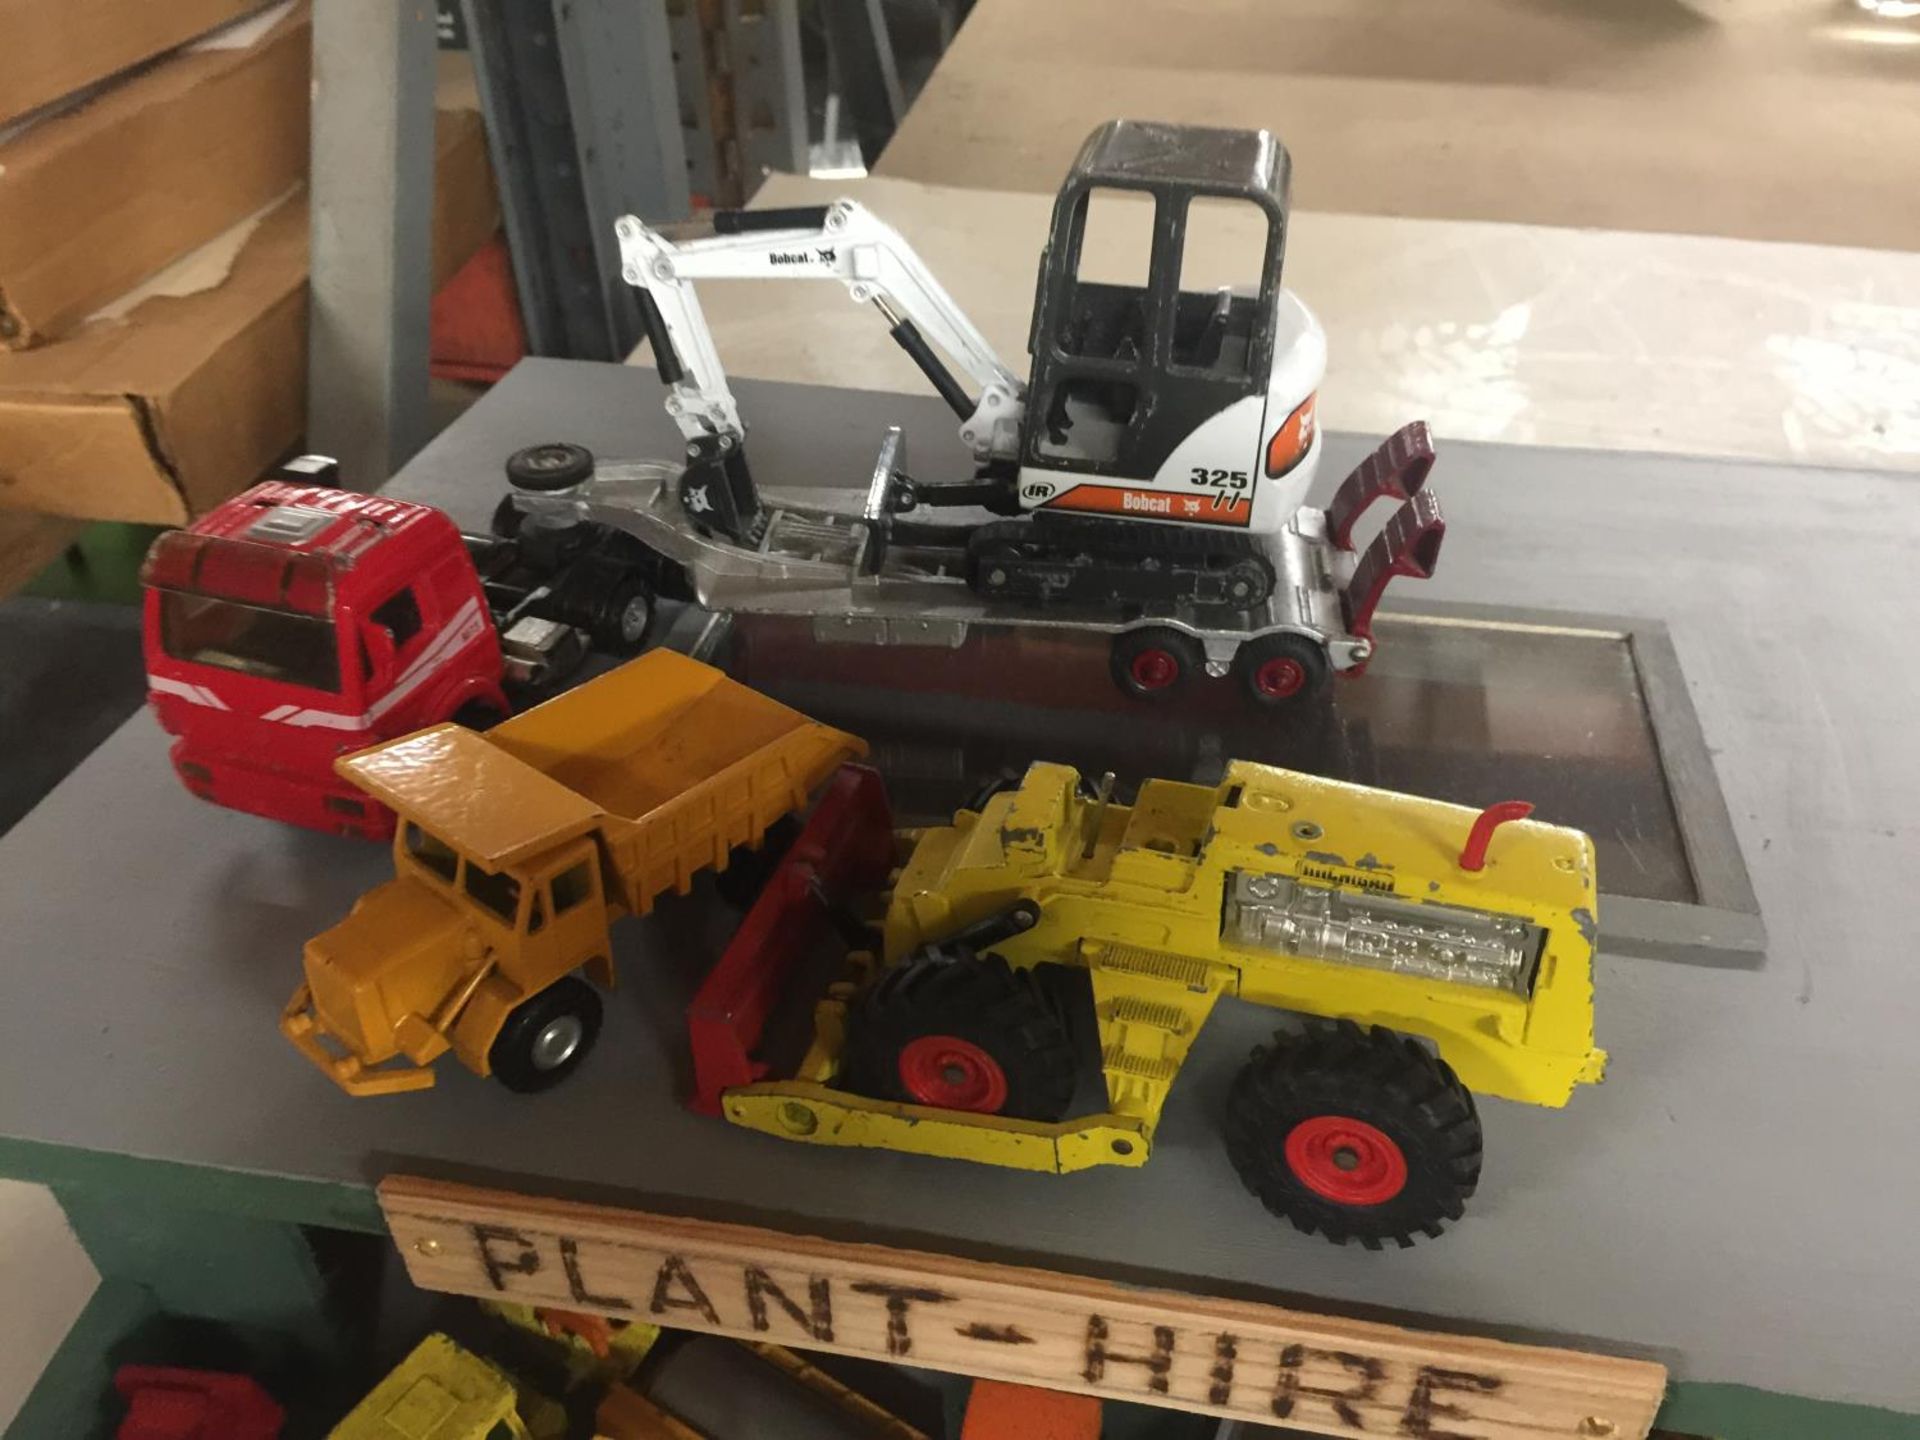 A PLANT HIRE GARAGE WITH TWELVE VARIOUS VEHICLES AND MACHINES - Image 3 of 3